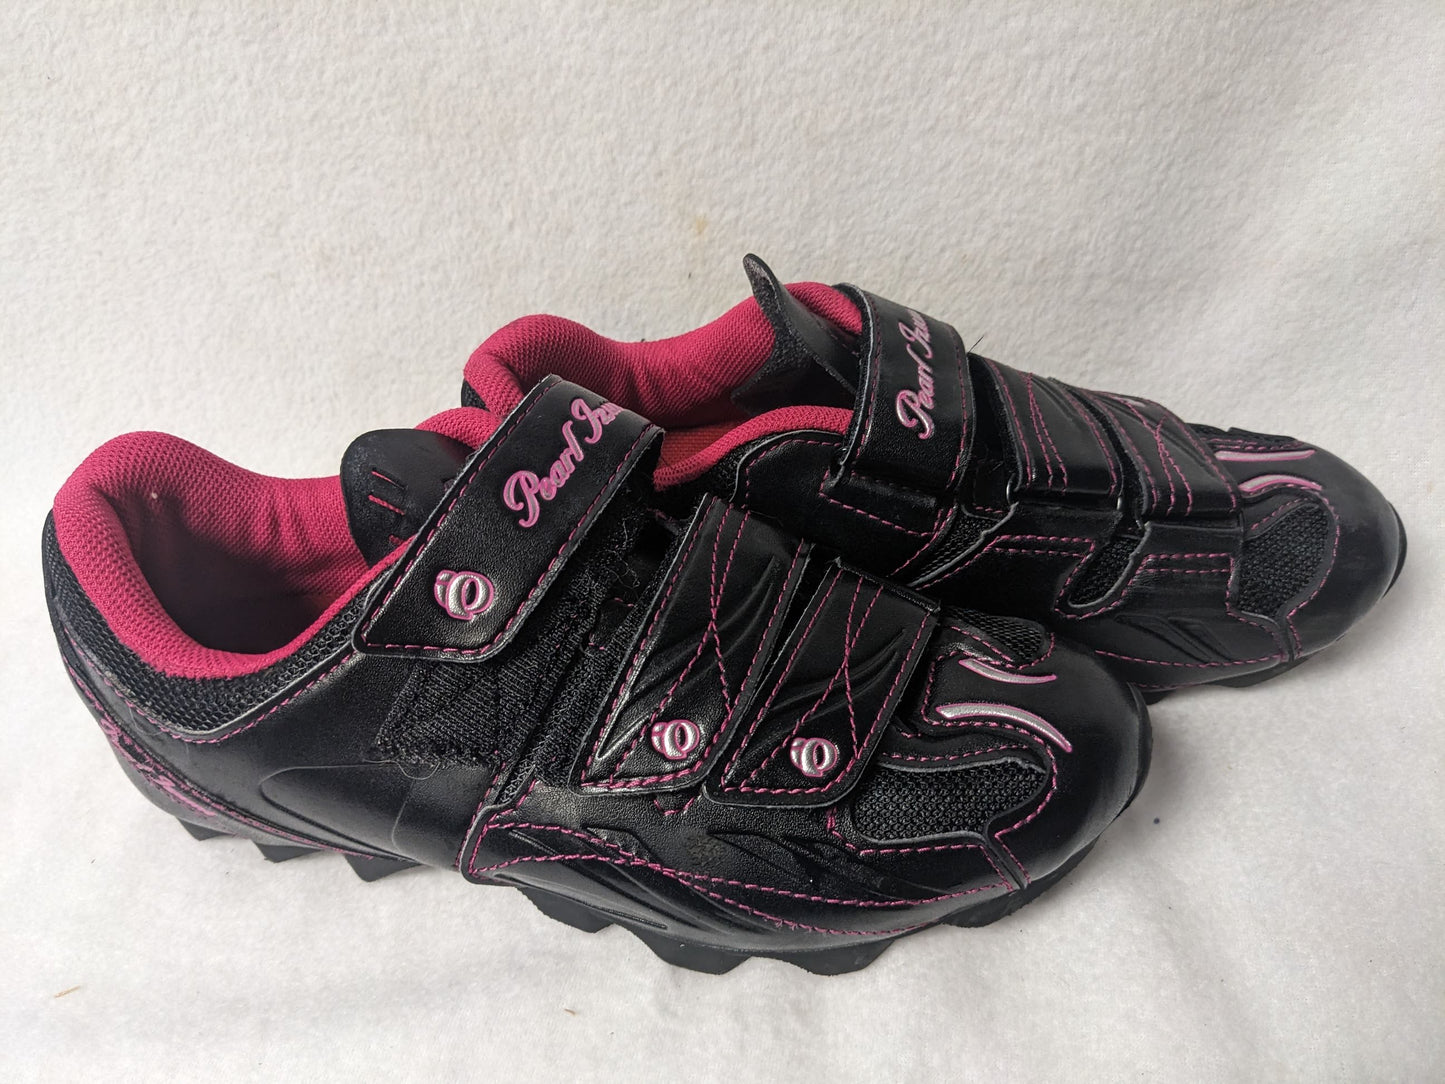 Pearl Izumi Women's Cycling Shoes Size Women 6.5 Color Black Condition Used